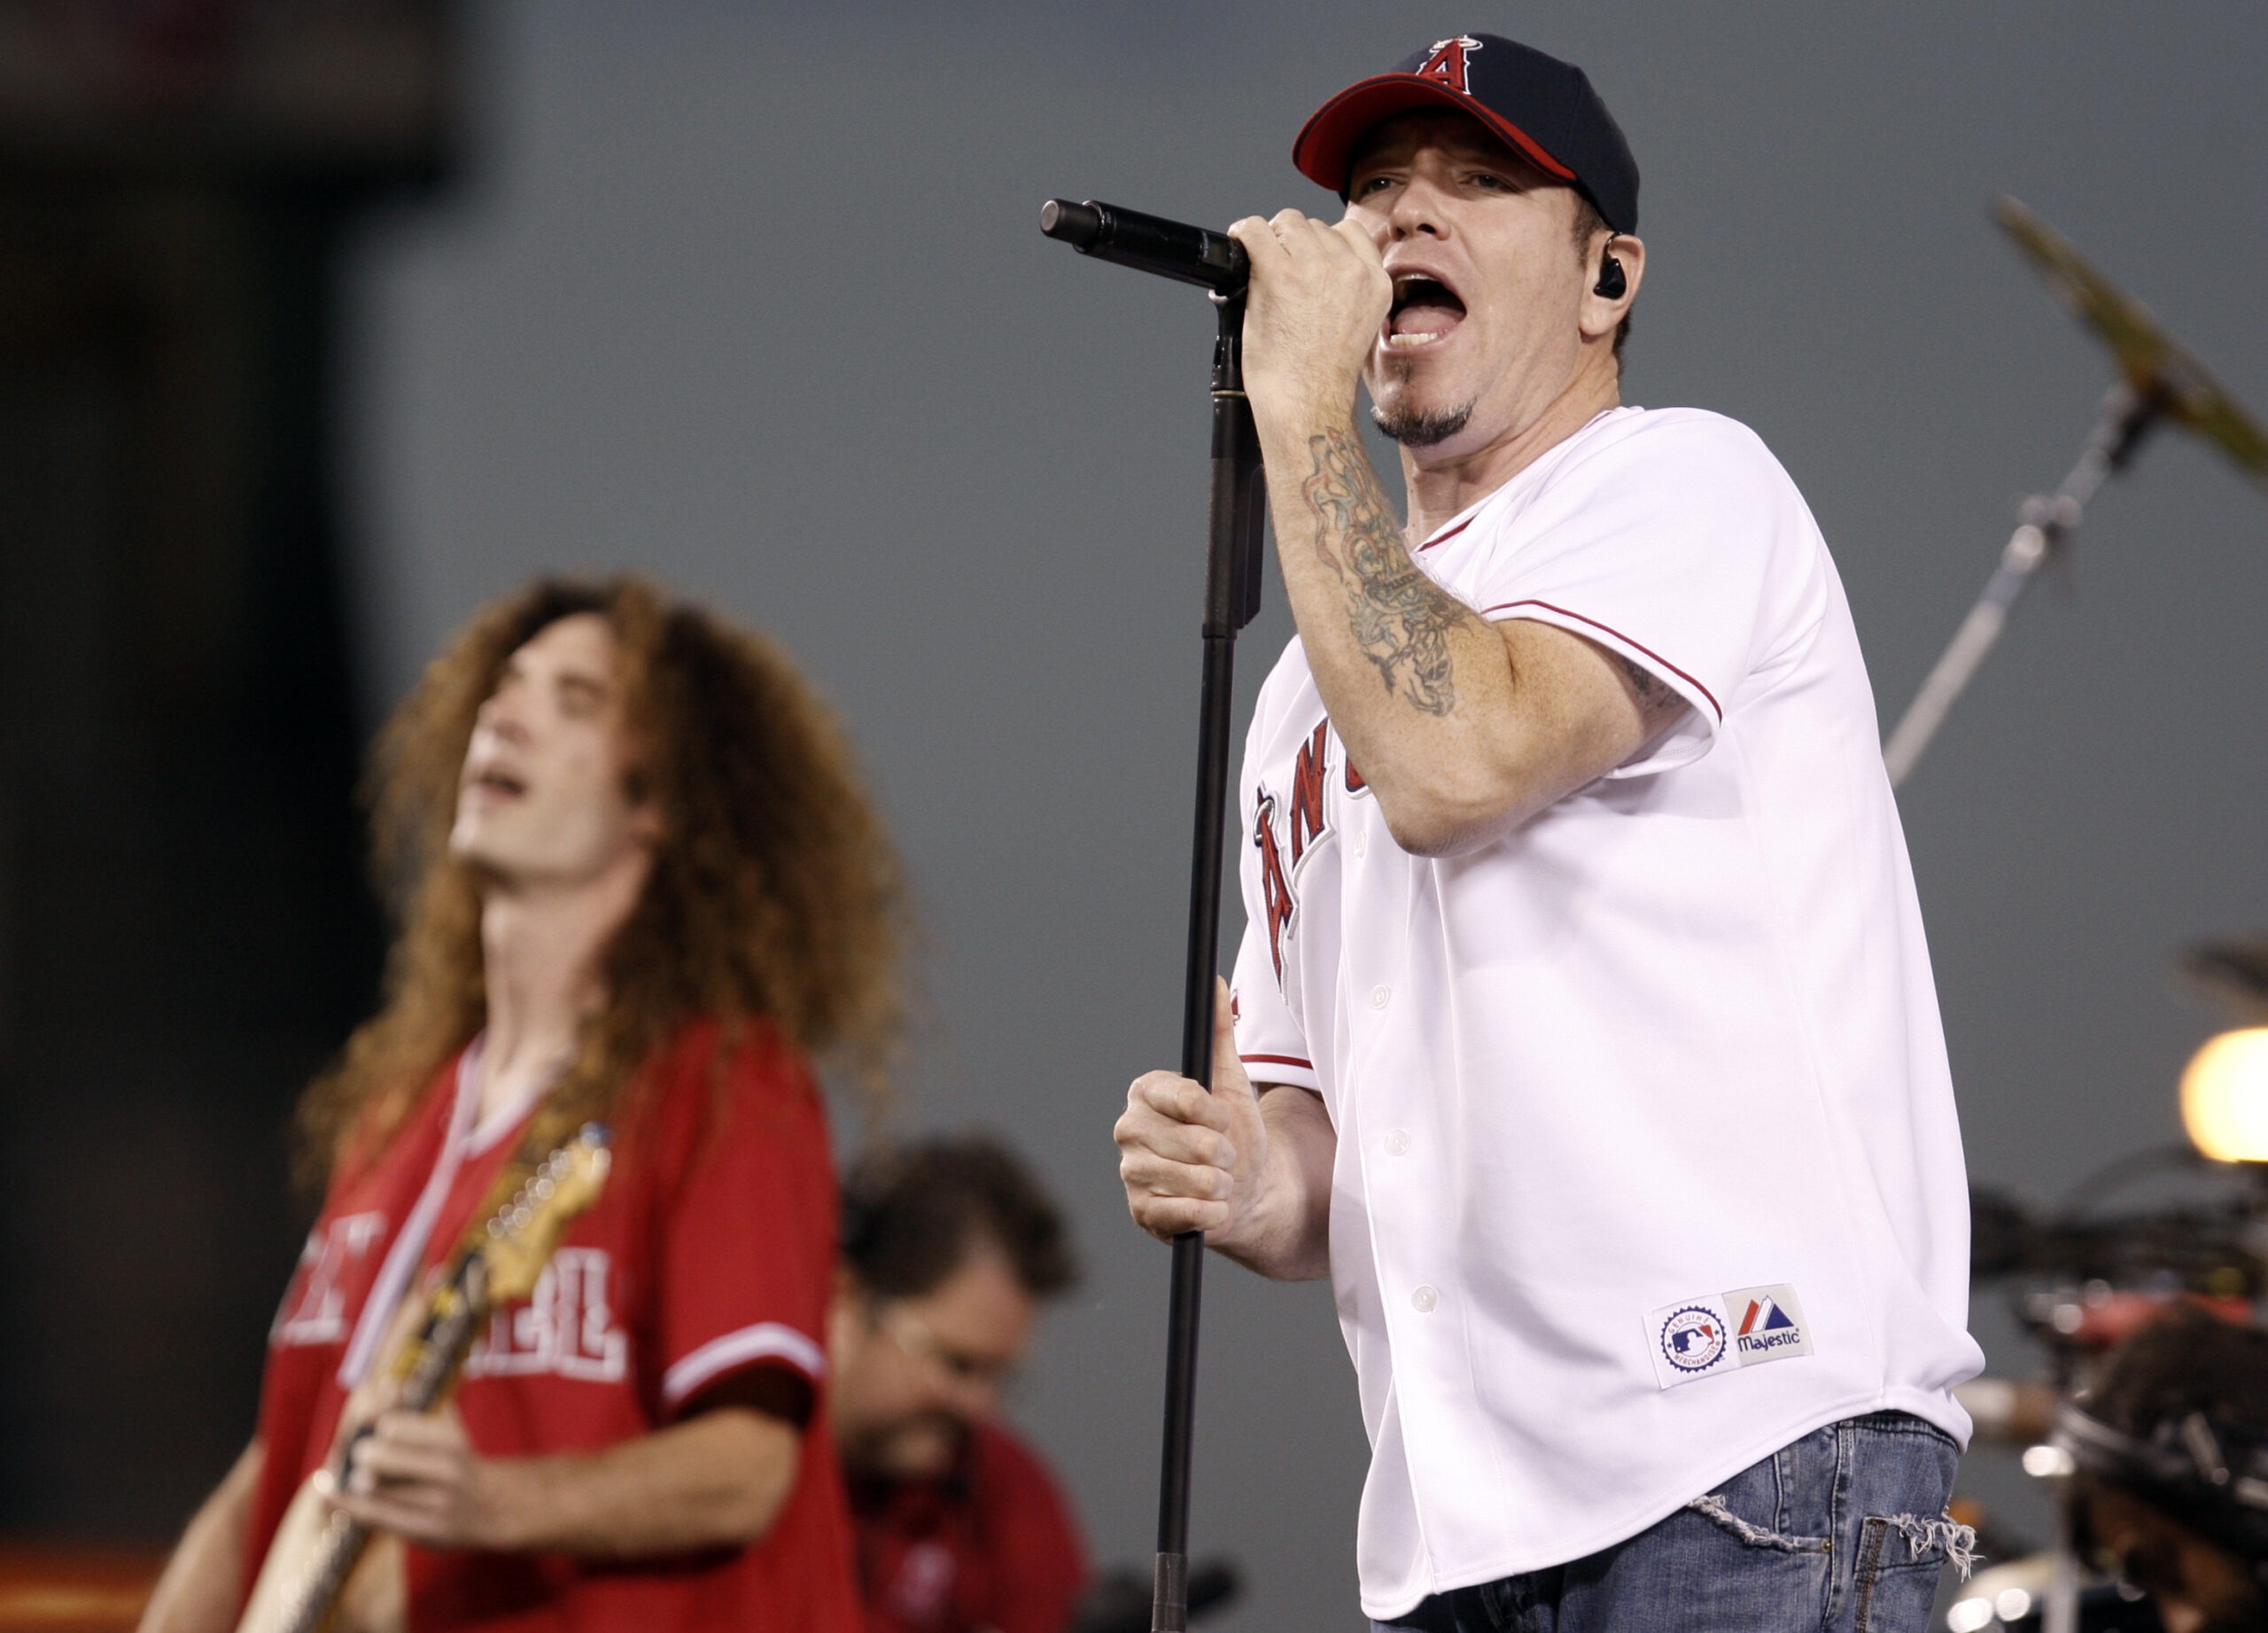 FILE - In this Sept. 29, 2008 file photo, Singer Steve Harwell, of Smash Mouth, performs with the b...